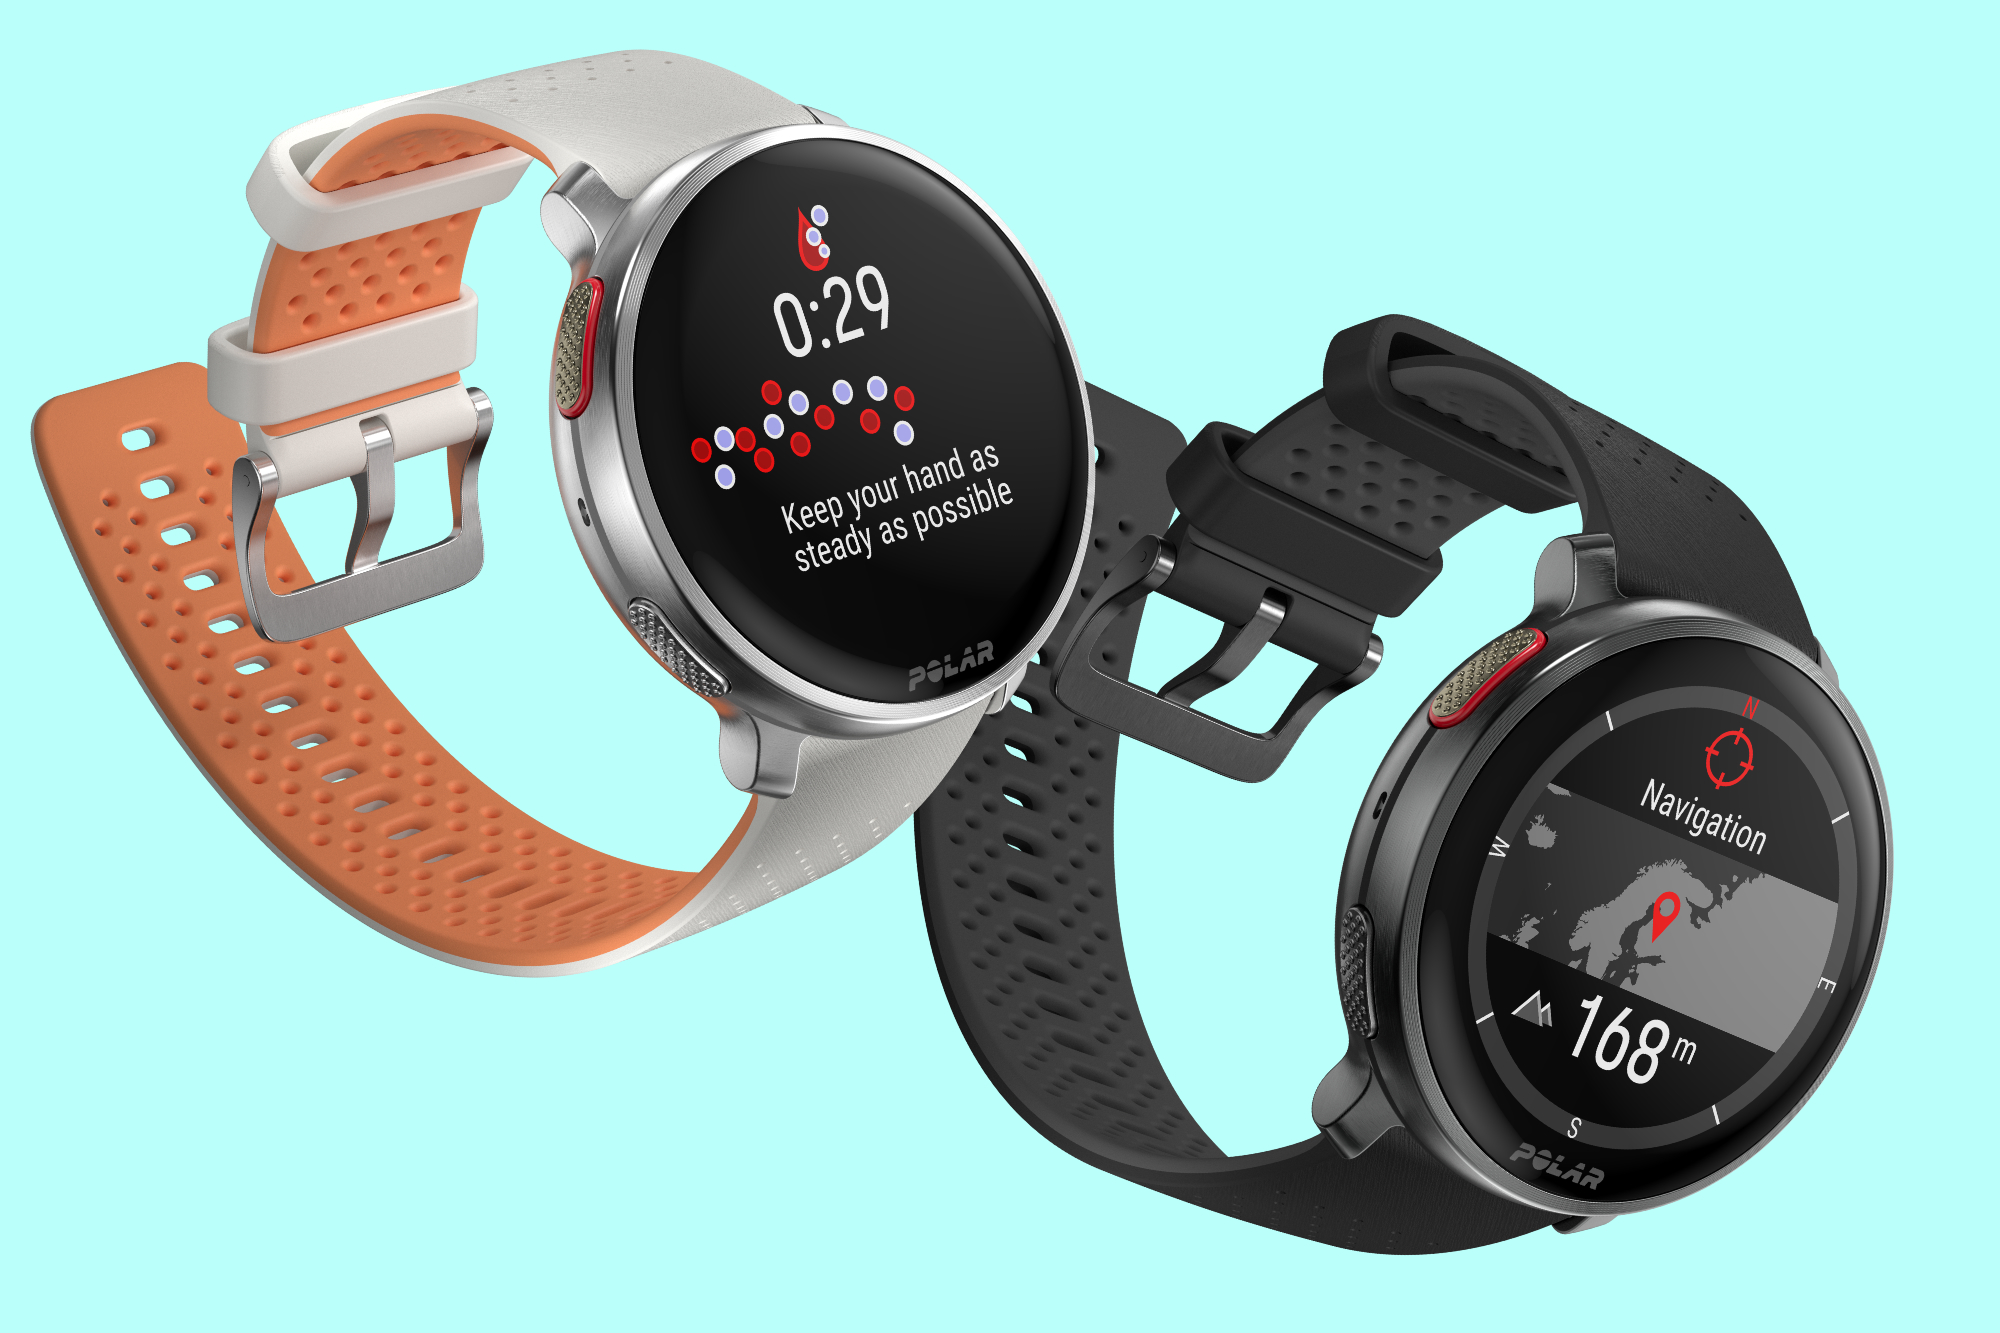 Polar's new smartwatch could be a Fitbit and Garmin killer